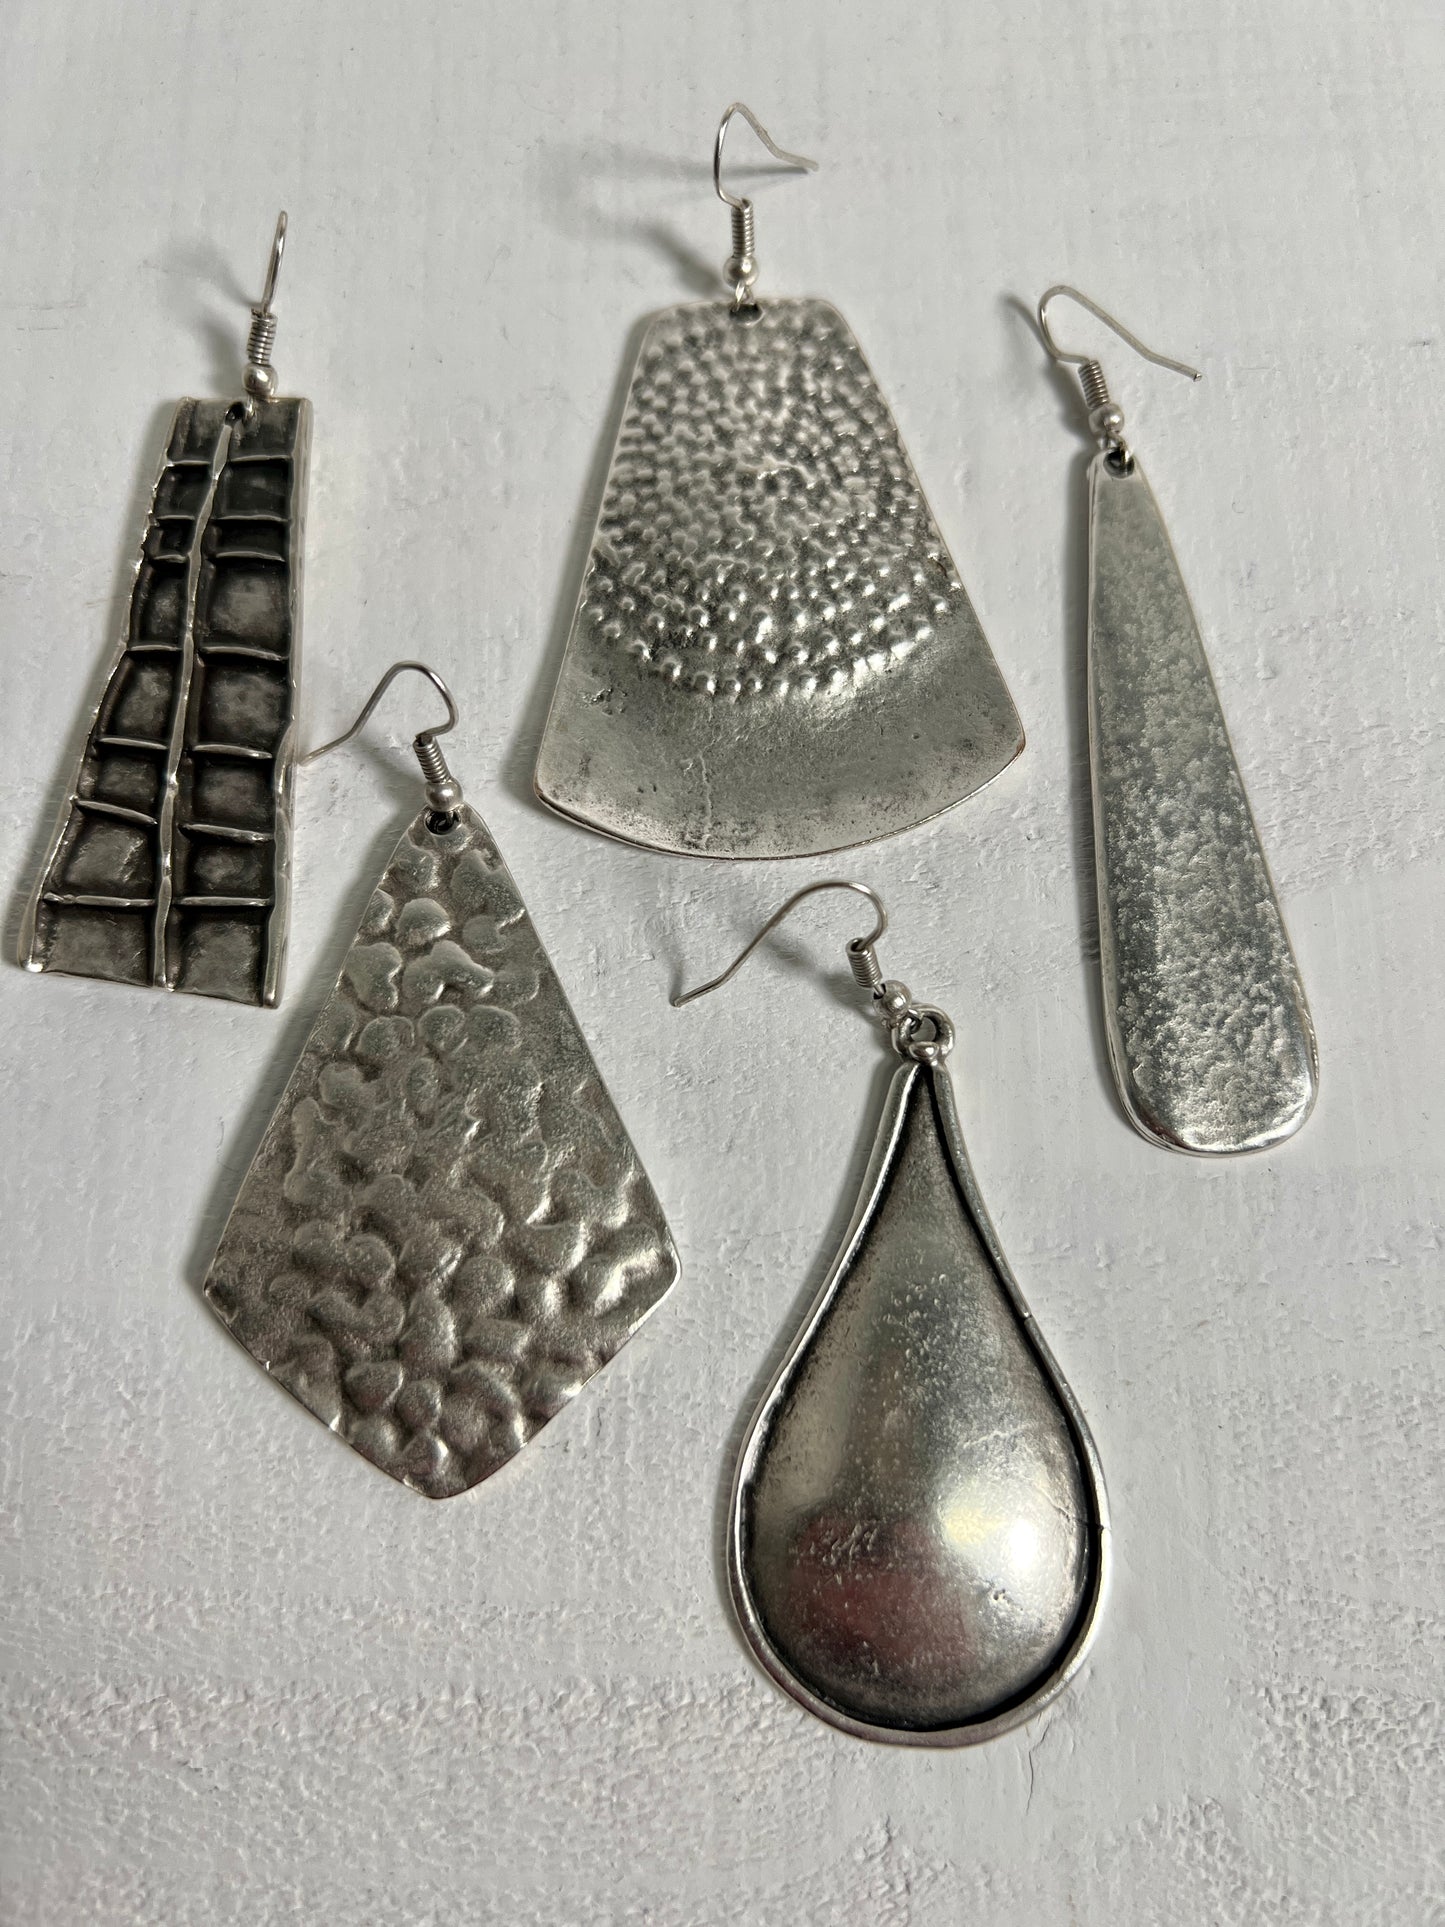 
                  
                    A group of Super Silver Long Boho Statement Earrings on a white surface.
                  
                